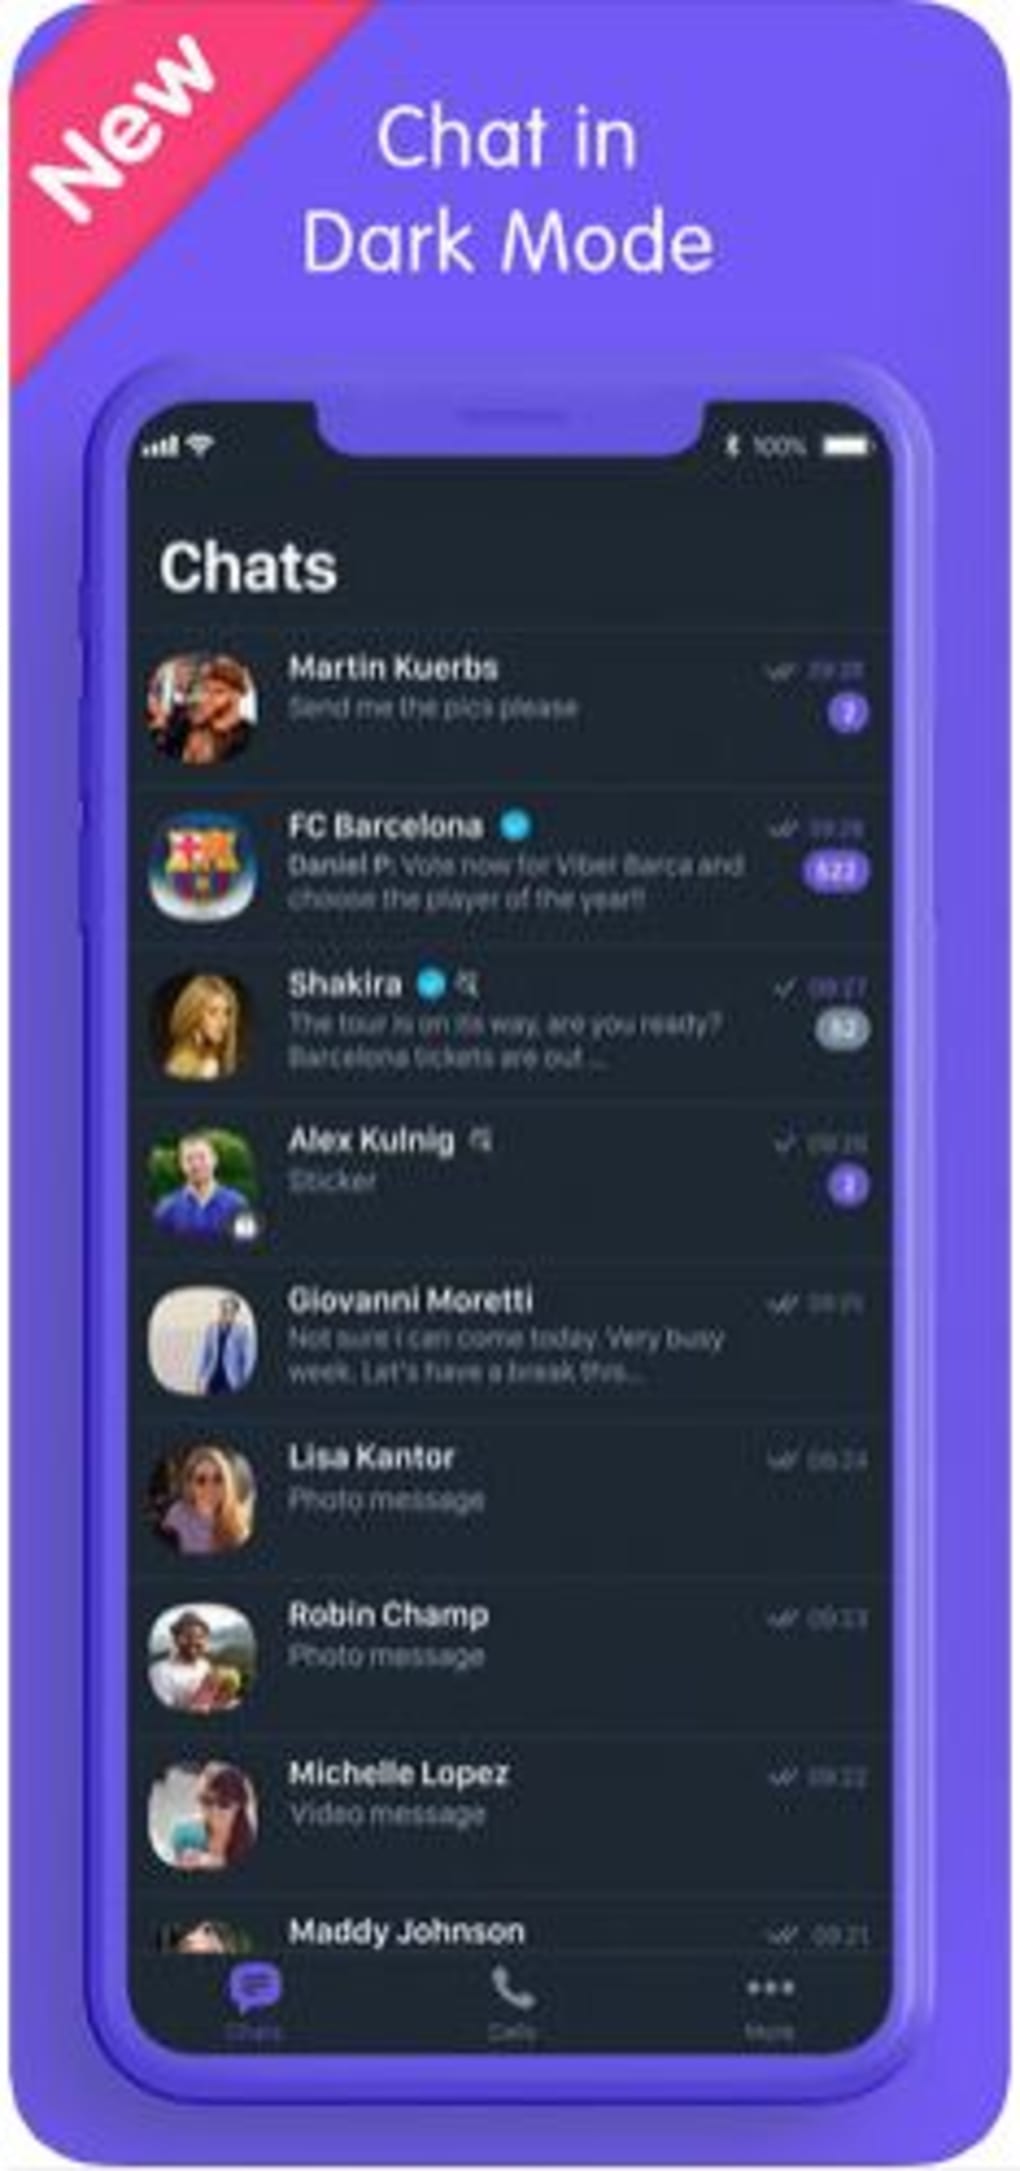 viber review for iphone